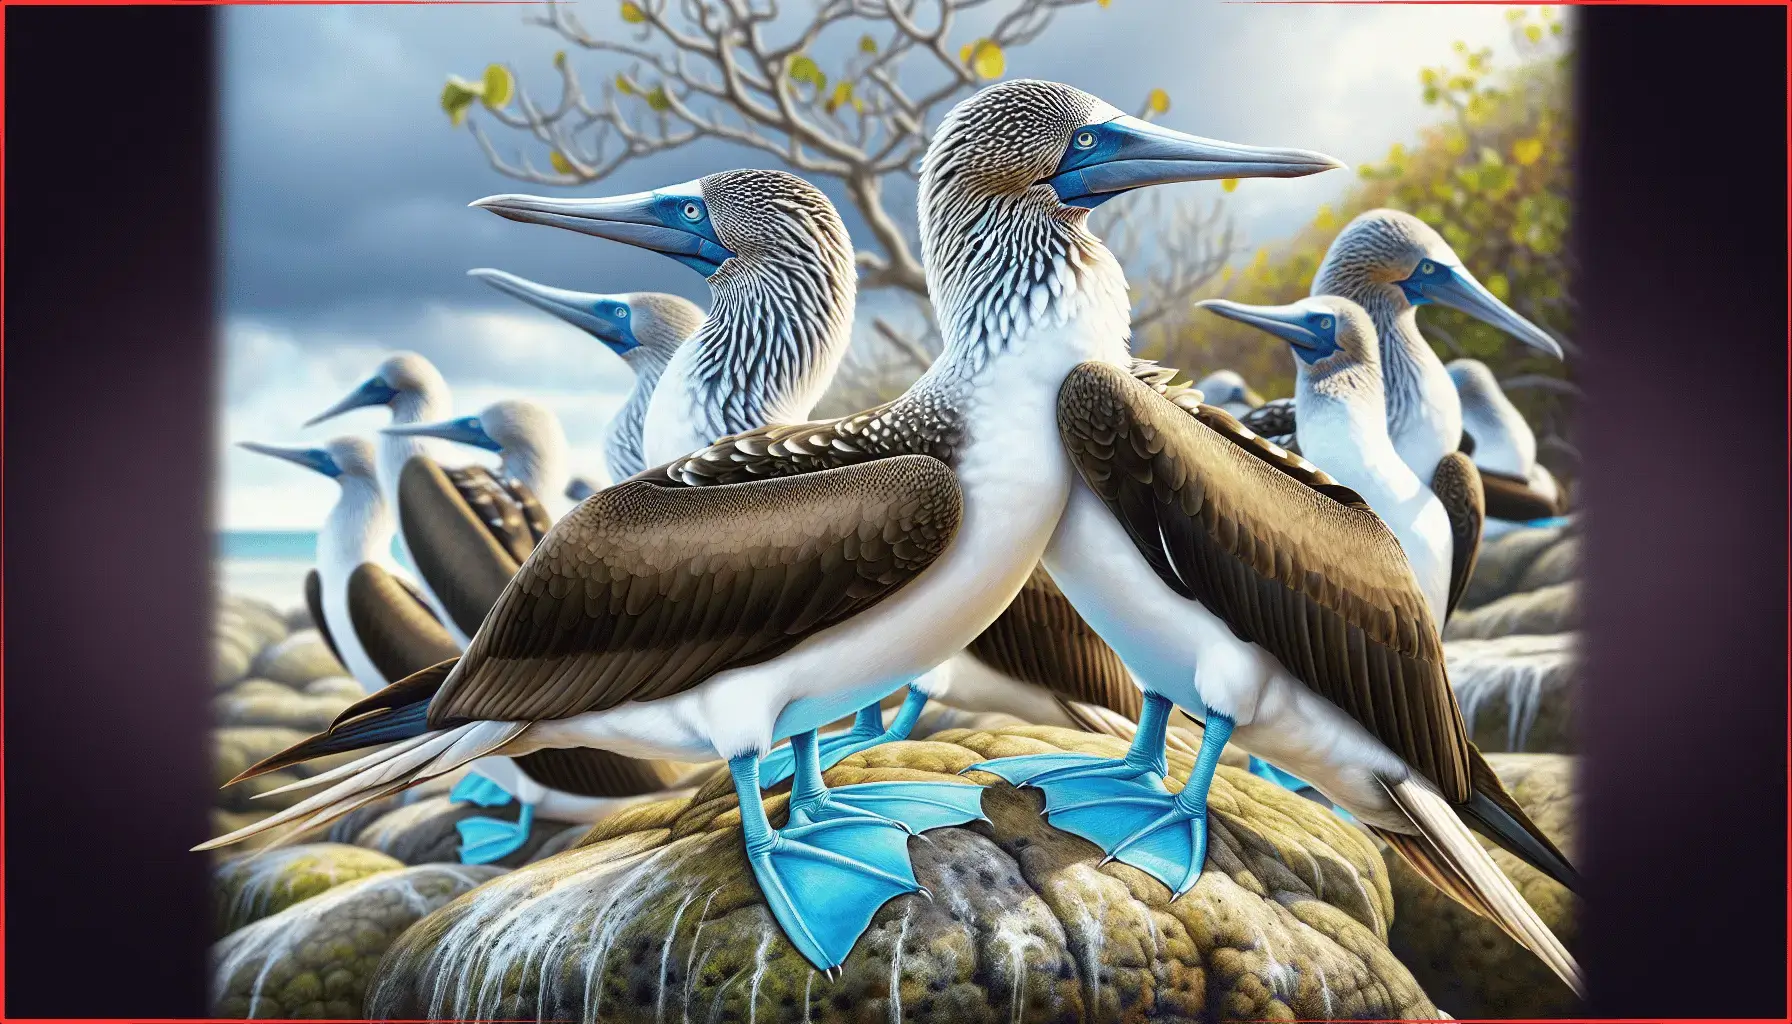 Conservation of marine birds, including the unique Blue Footed Boobie, is crucial for maintaining the balance of ecosystems. Learn about their habitat and the threats they face.